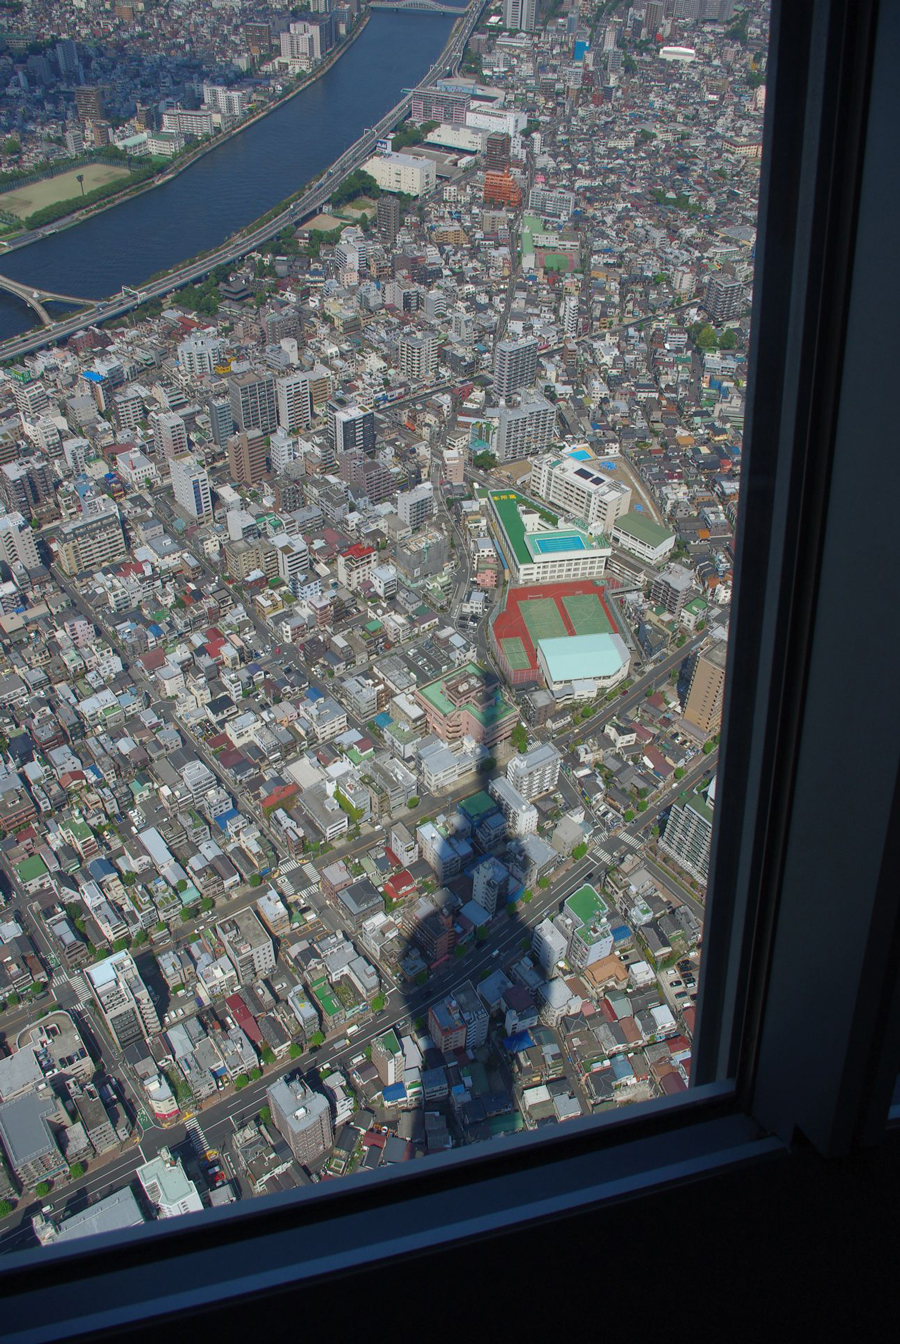 The largest sundial in Tokyo at Tokyo Skytree